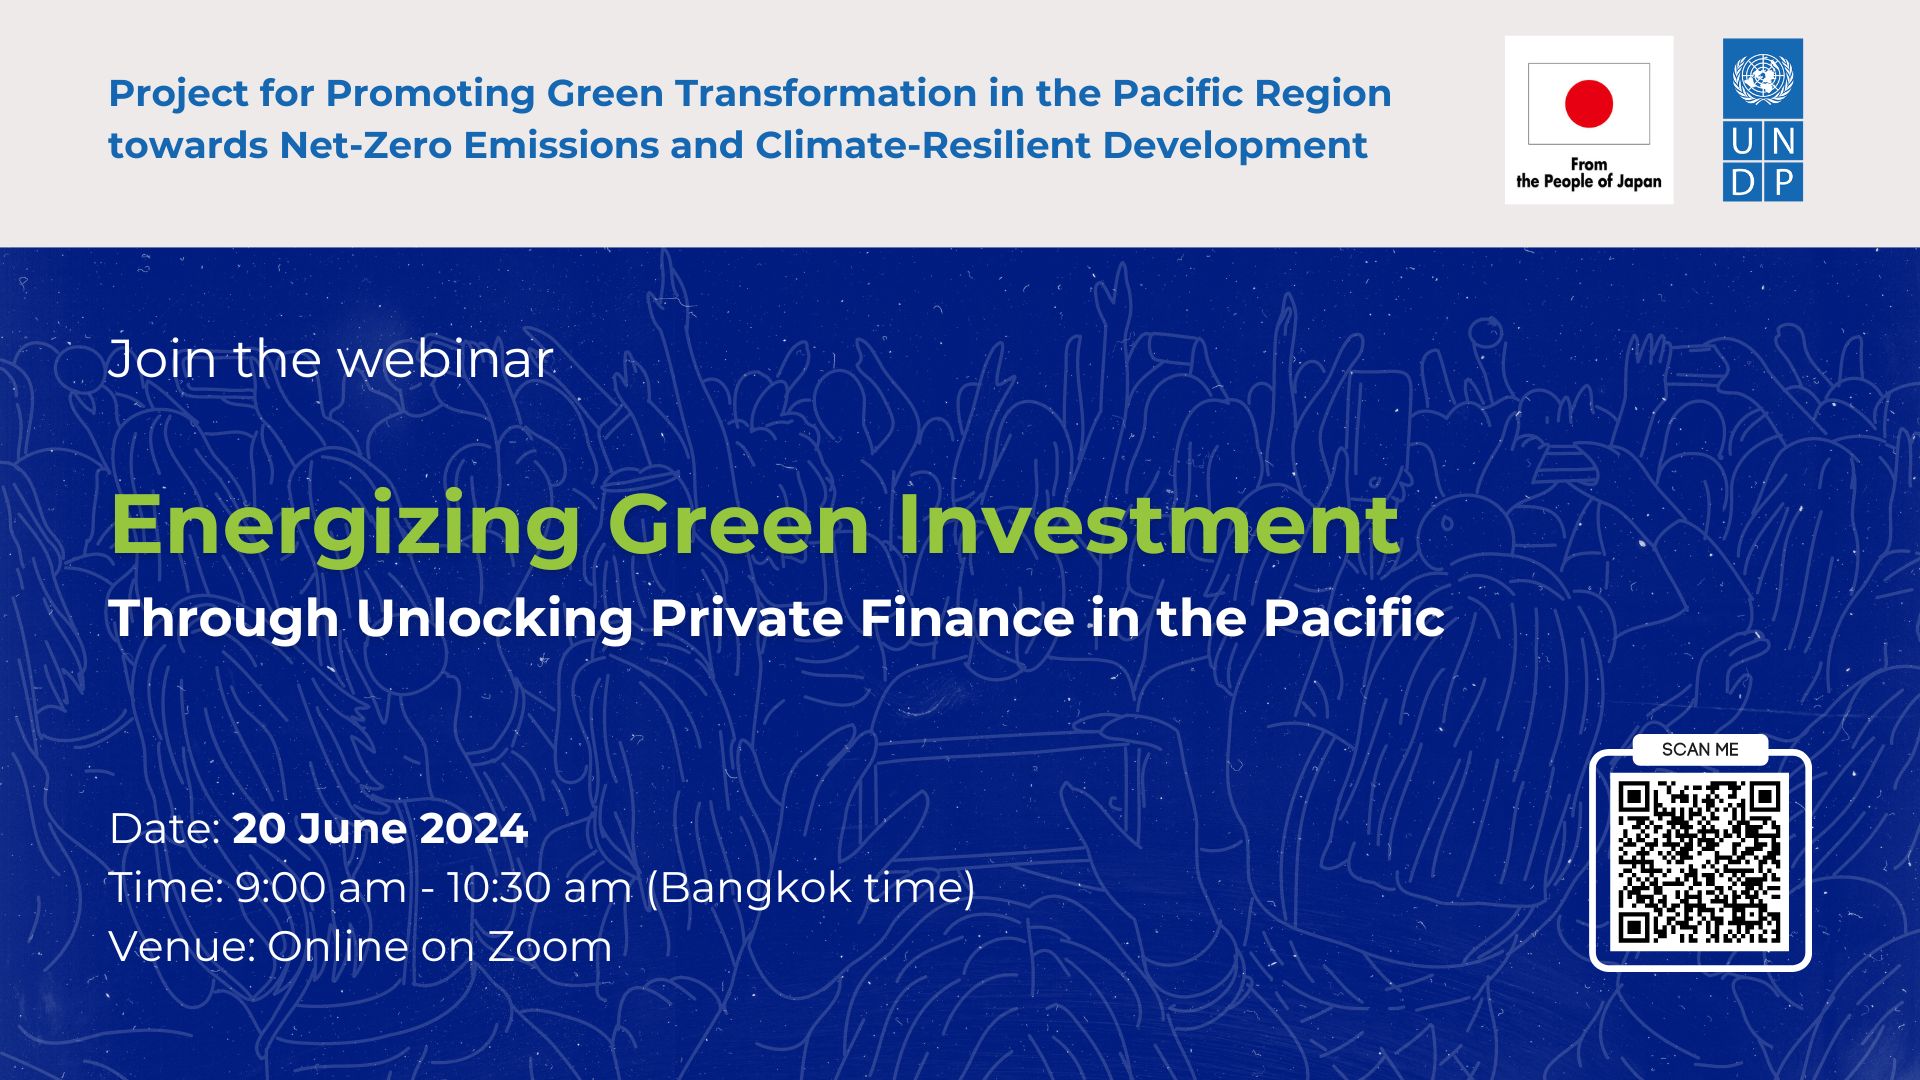 Energizing Green Investment Through Unlocking Private Finance in the Pacific